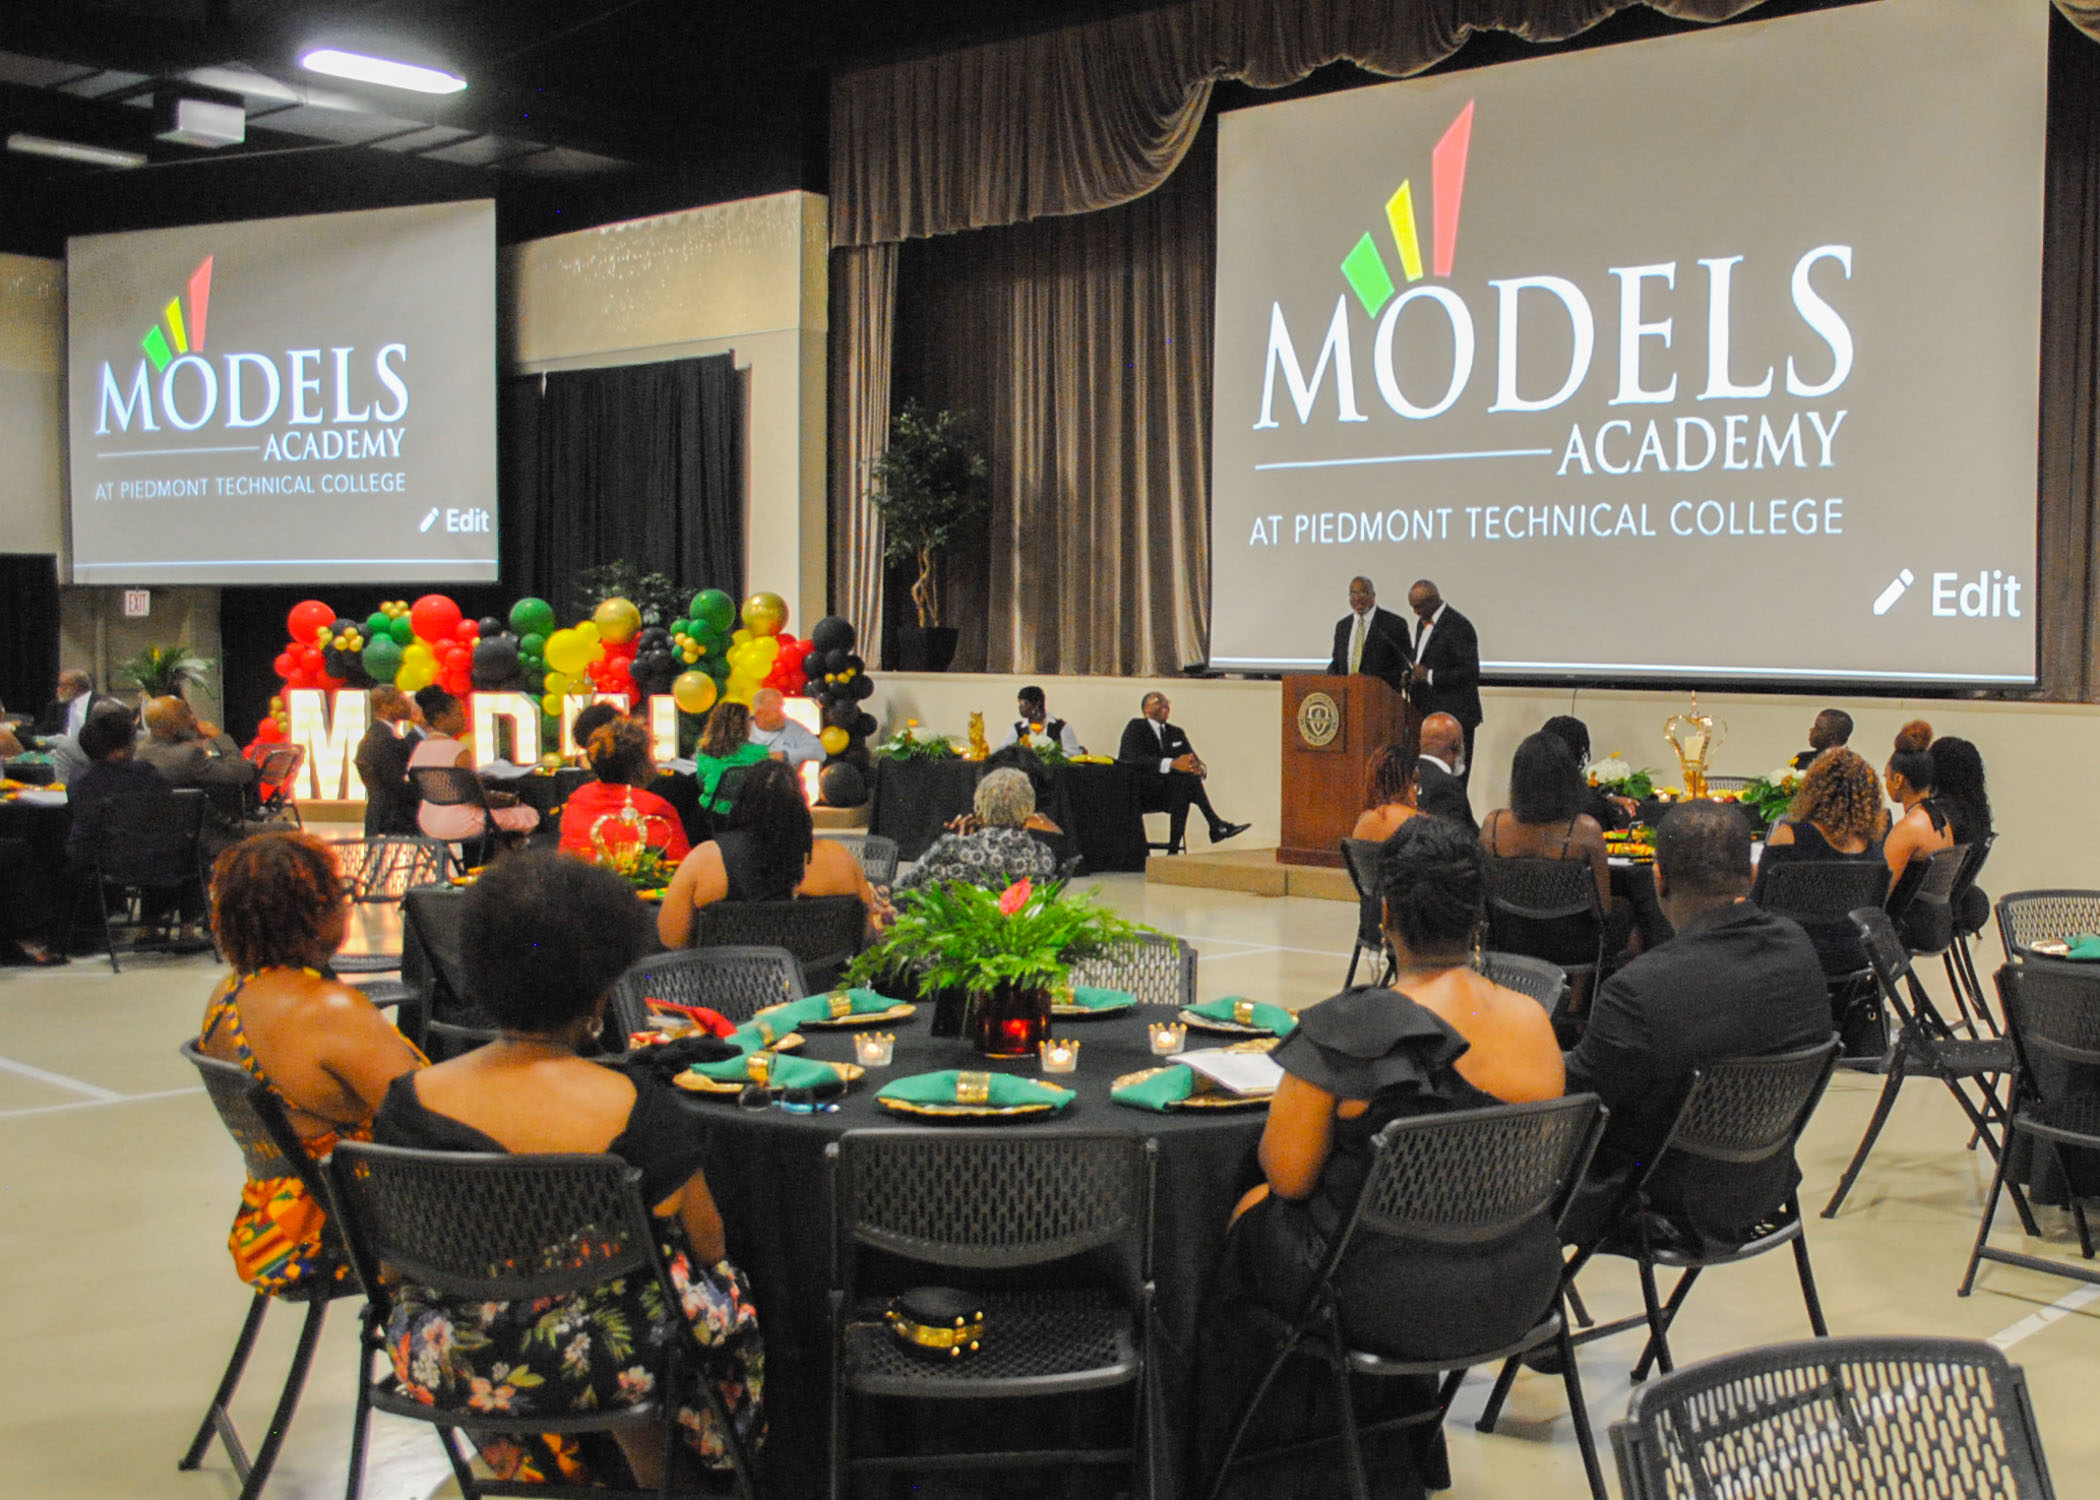 The MODELS Academy Gala